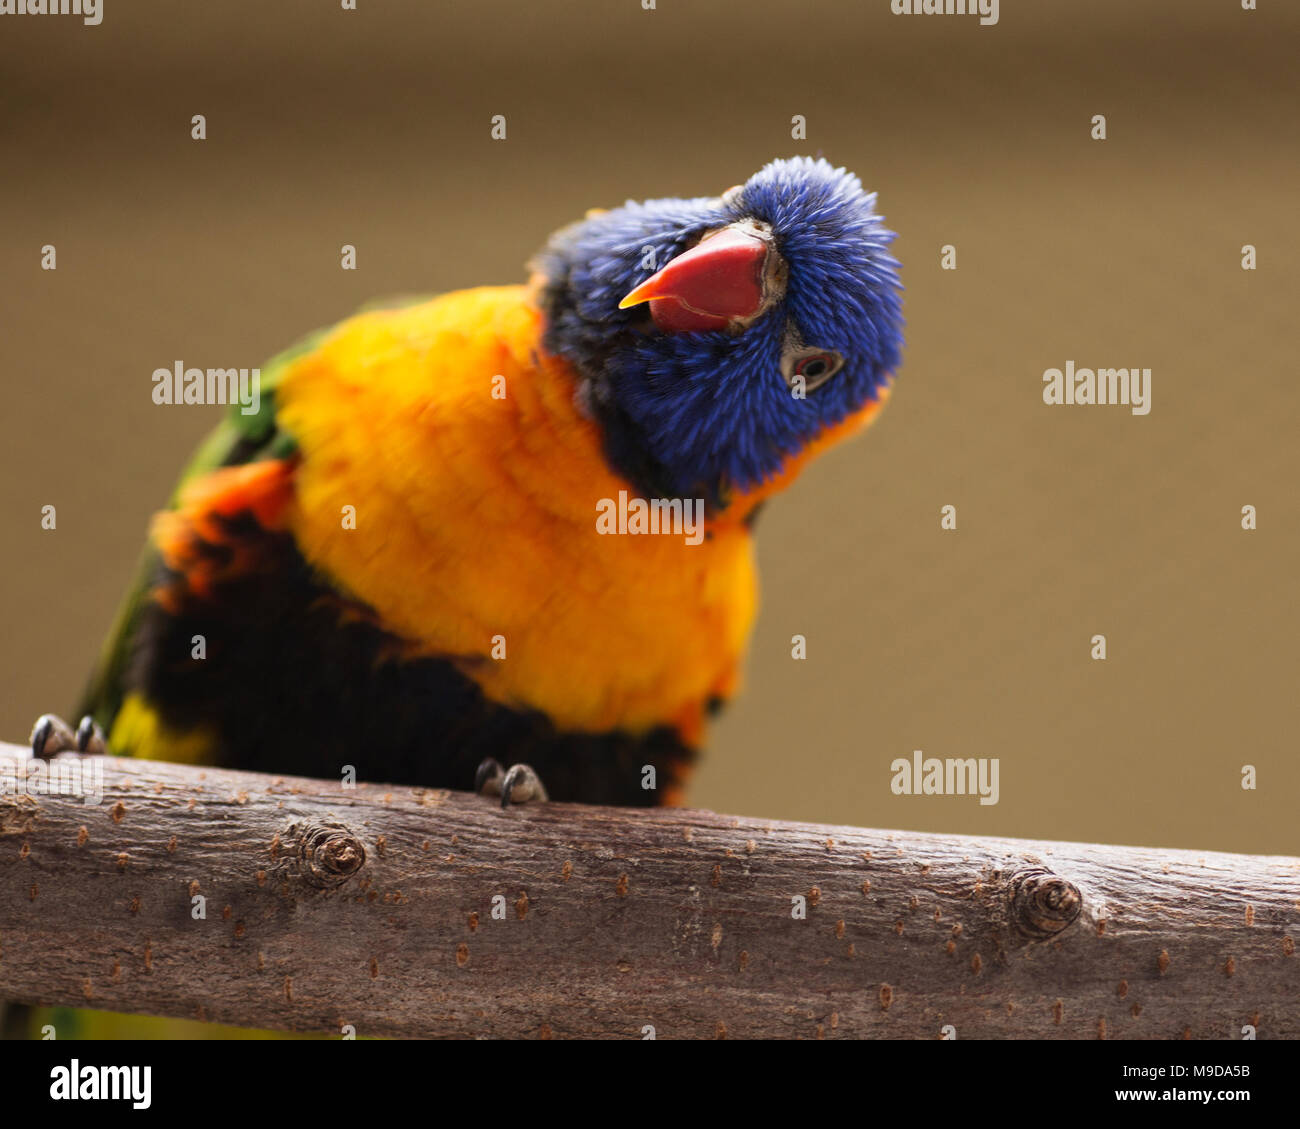 A closeup portrait of a rainbow lorikeet (Trichoglossus moluccanus) perched on a branch. Stock Photo